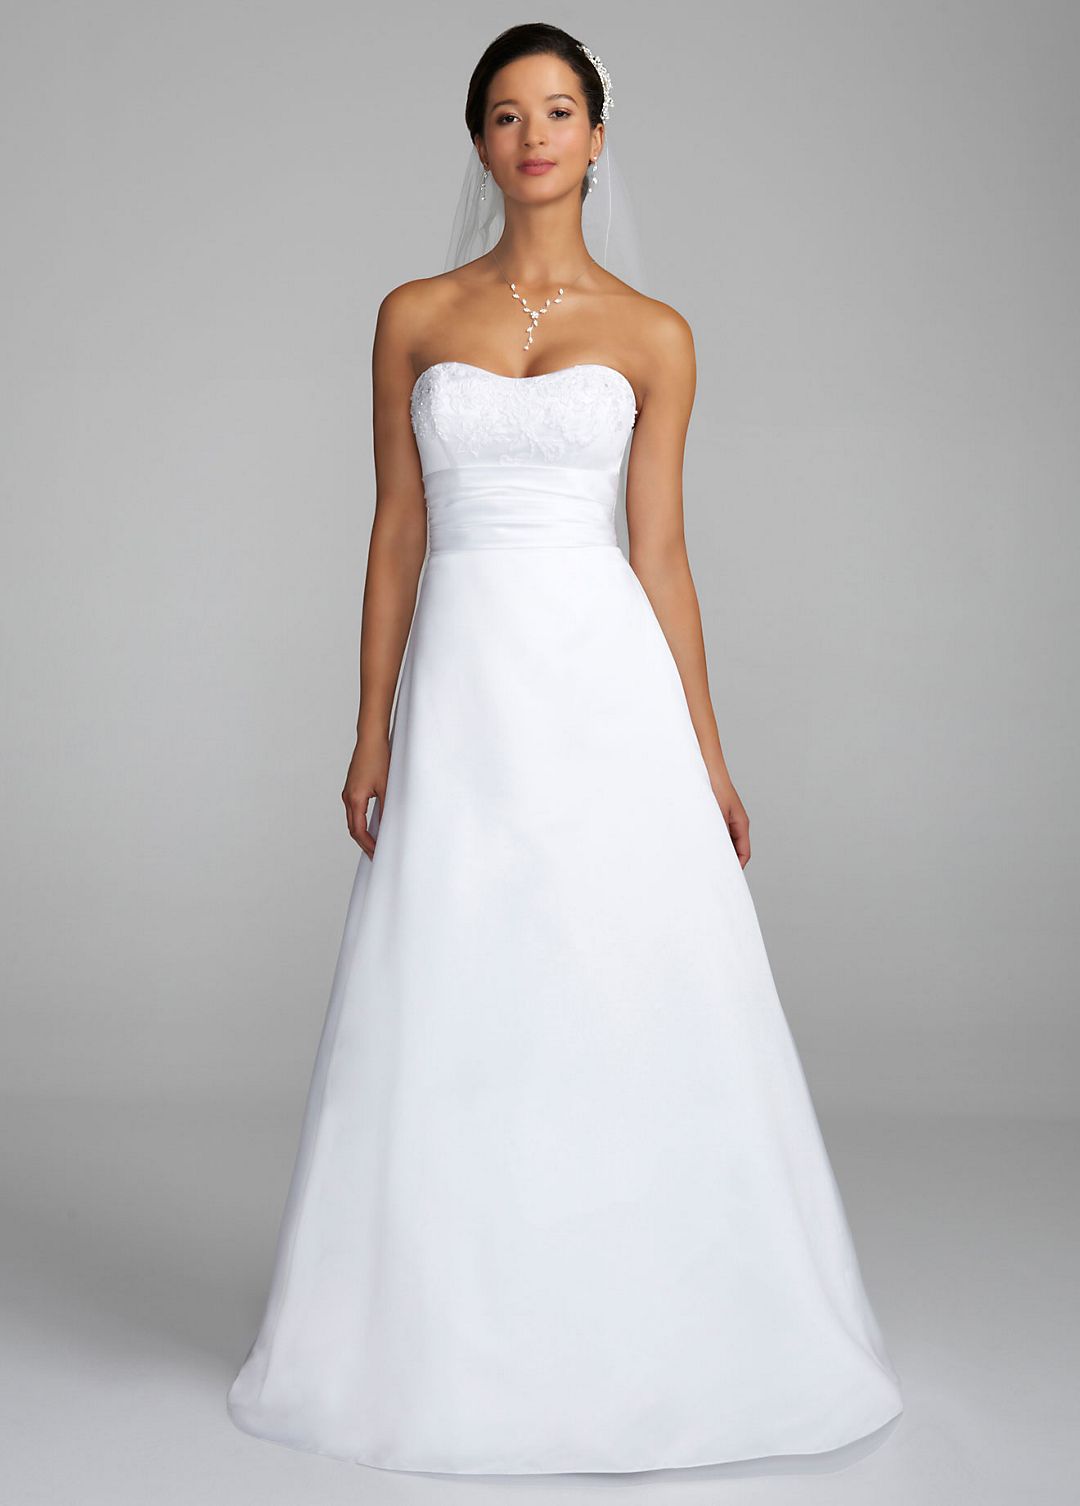 Satin Strapless Al Line Gown with Ruched Waistband Image 4